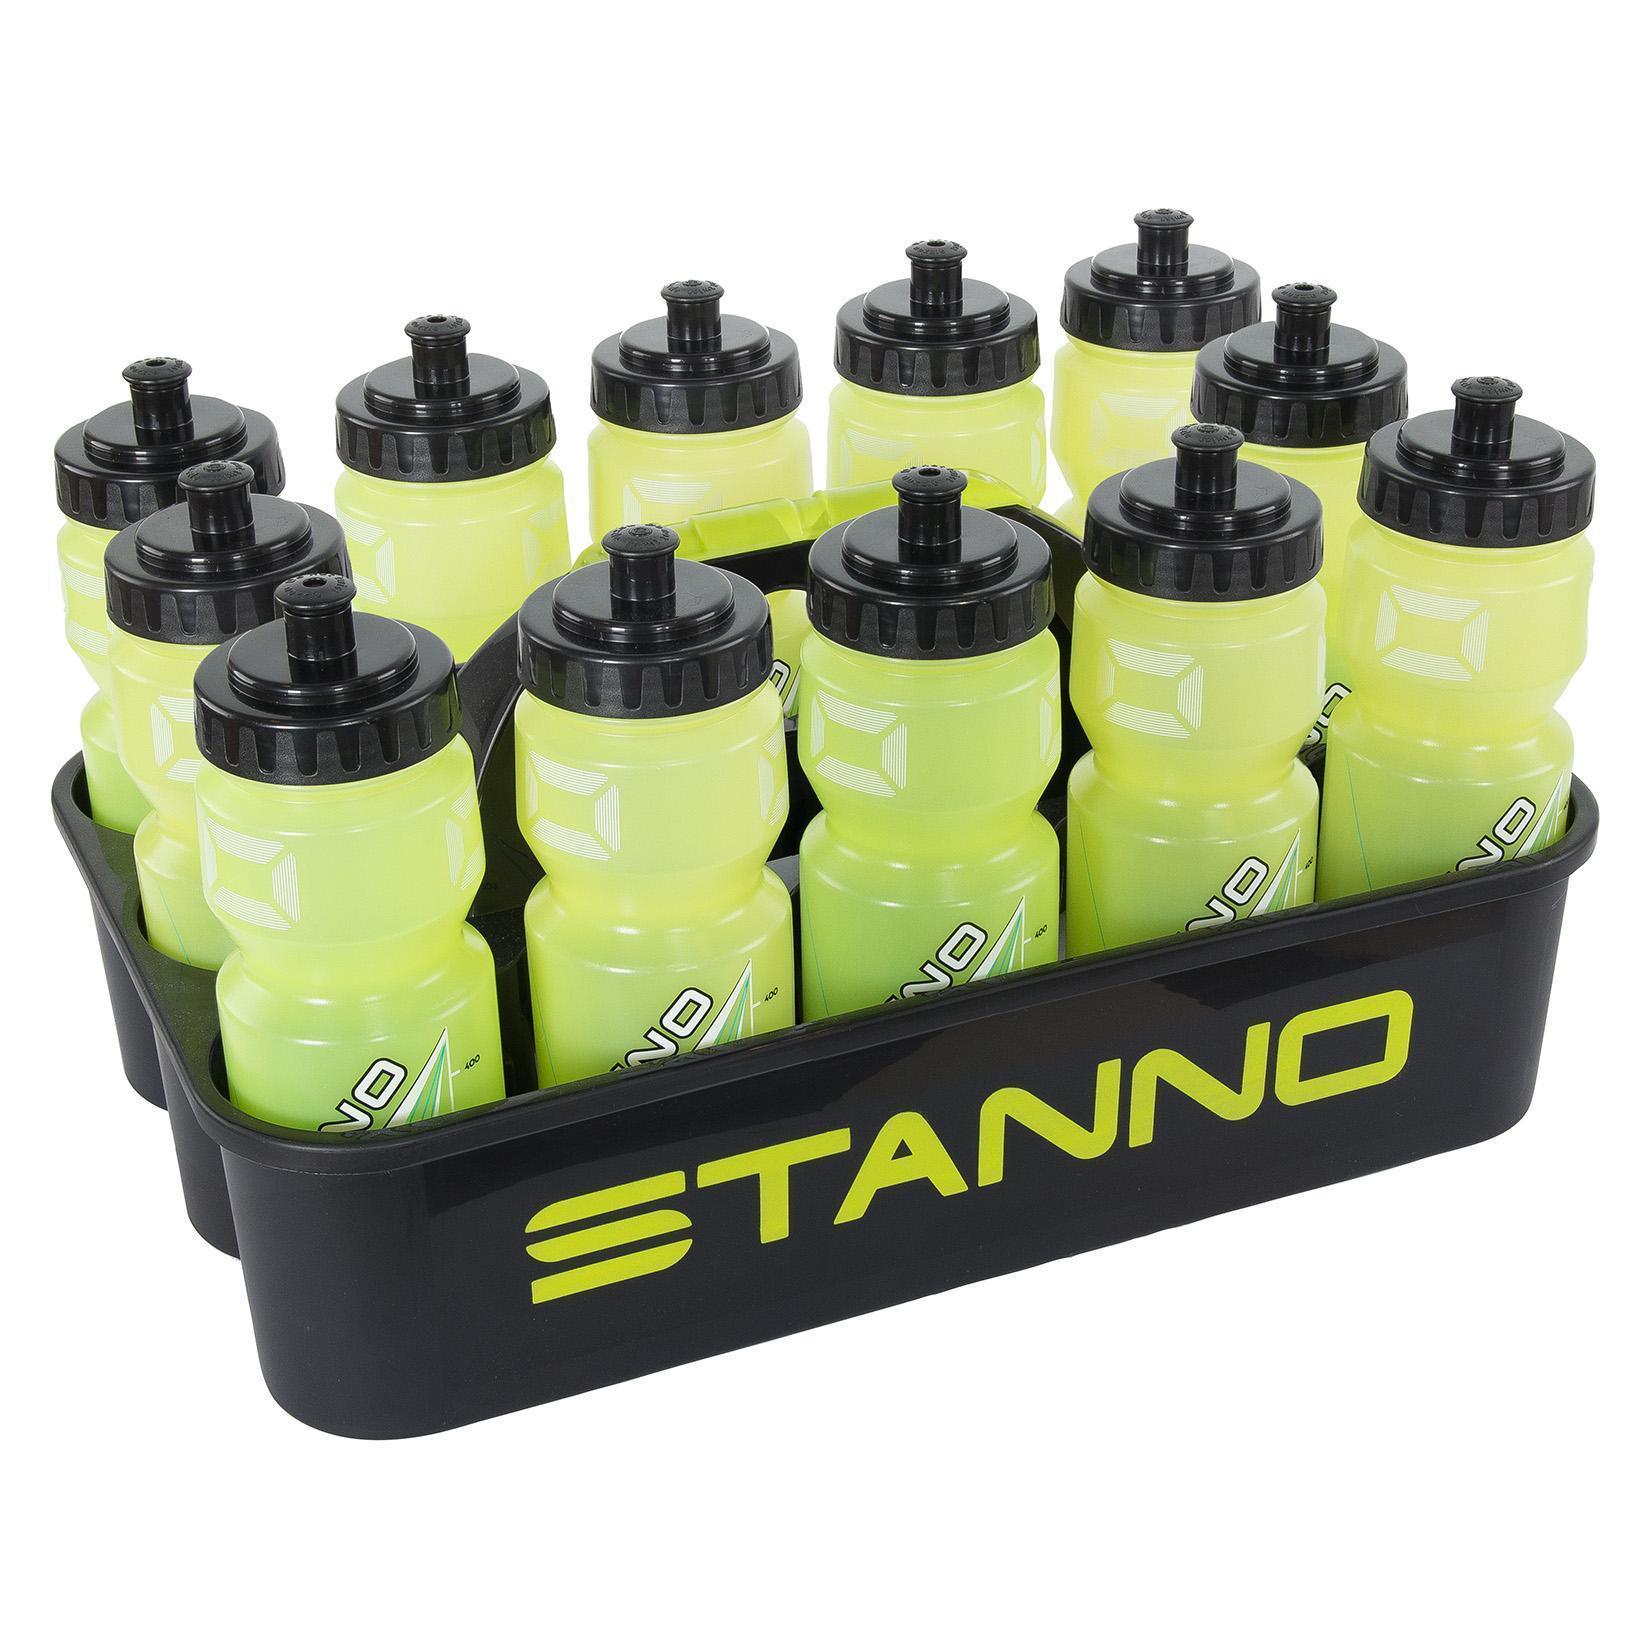 Stanno Bottle Carrier The Luxe